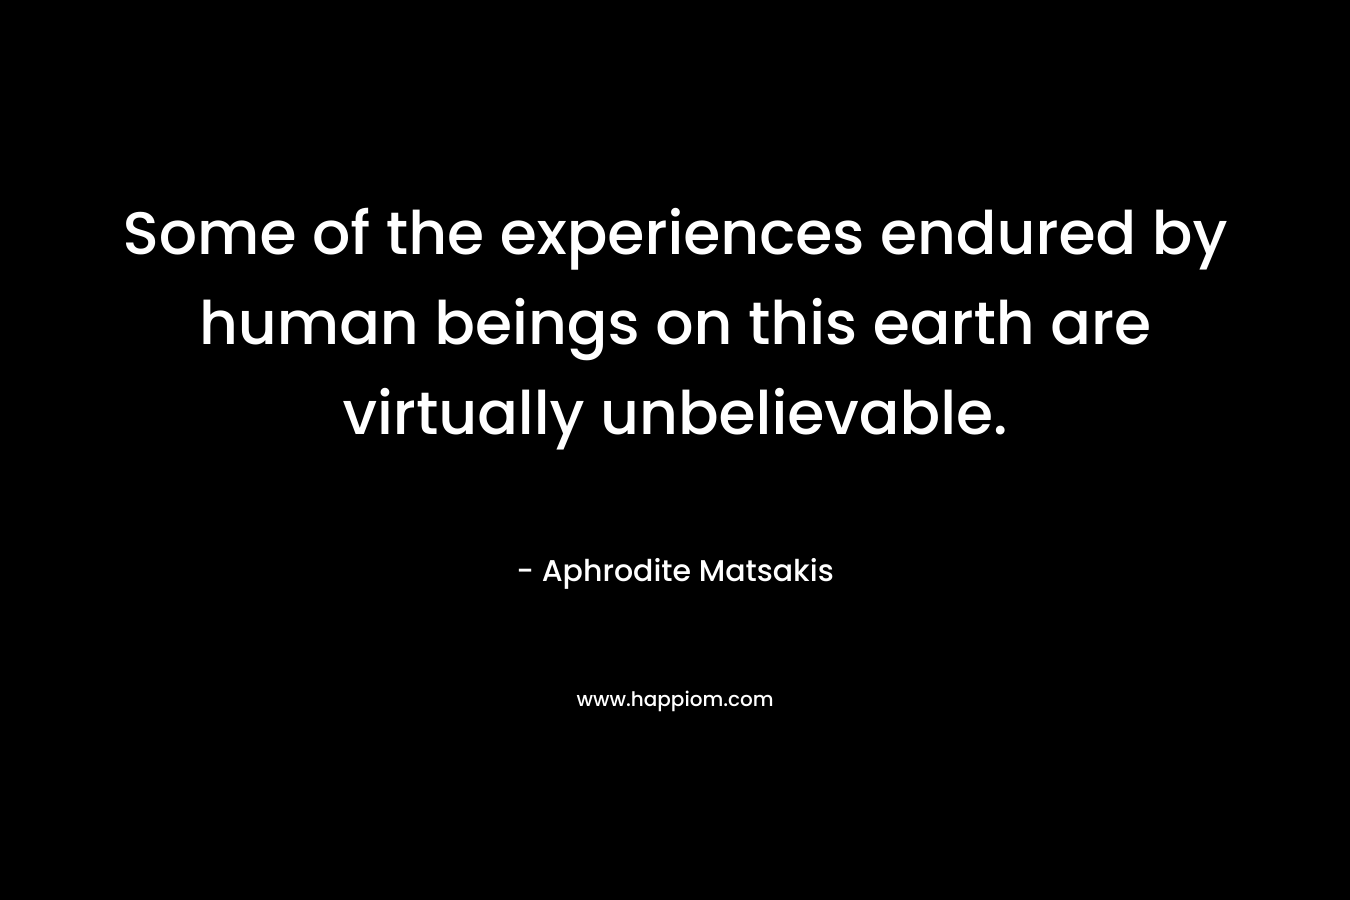 Some of the experiences endured by human beings on this earth are virtually unbelievable.